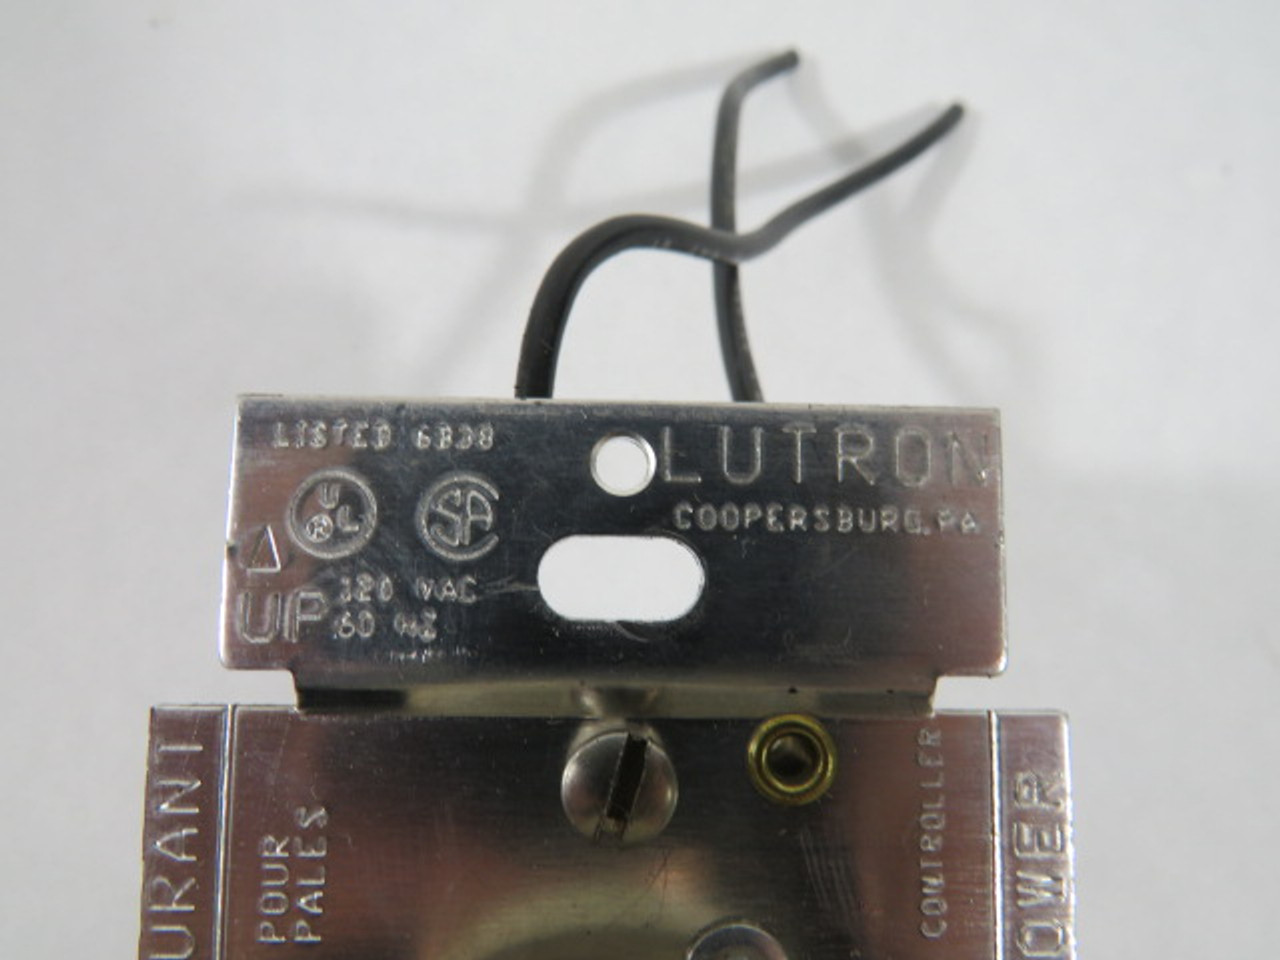 Lutron D-600P 120VAC 60Hz Rotary Lighting Dimmer USED